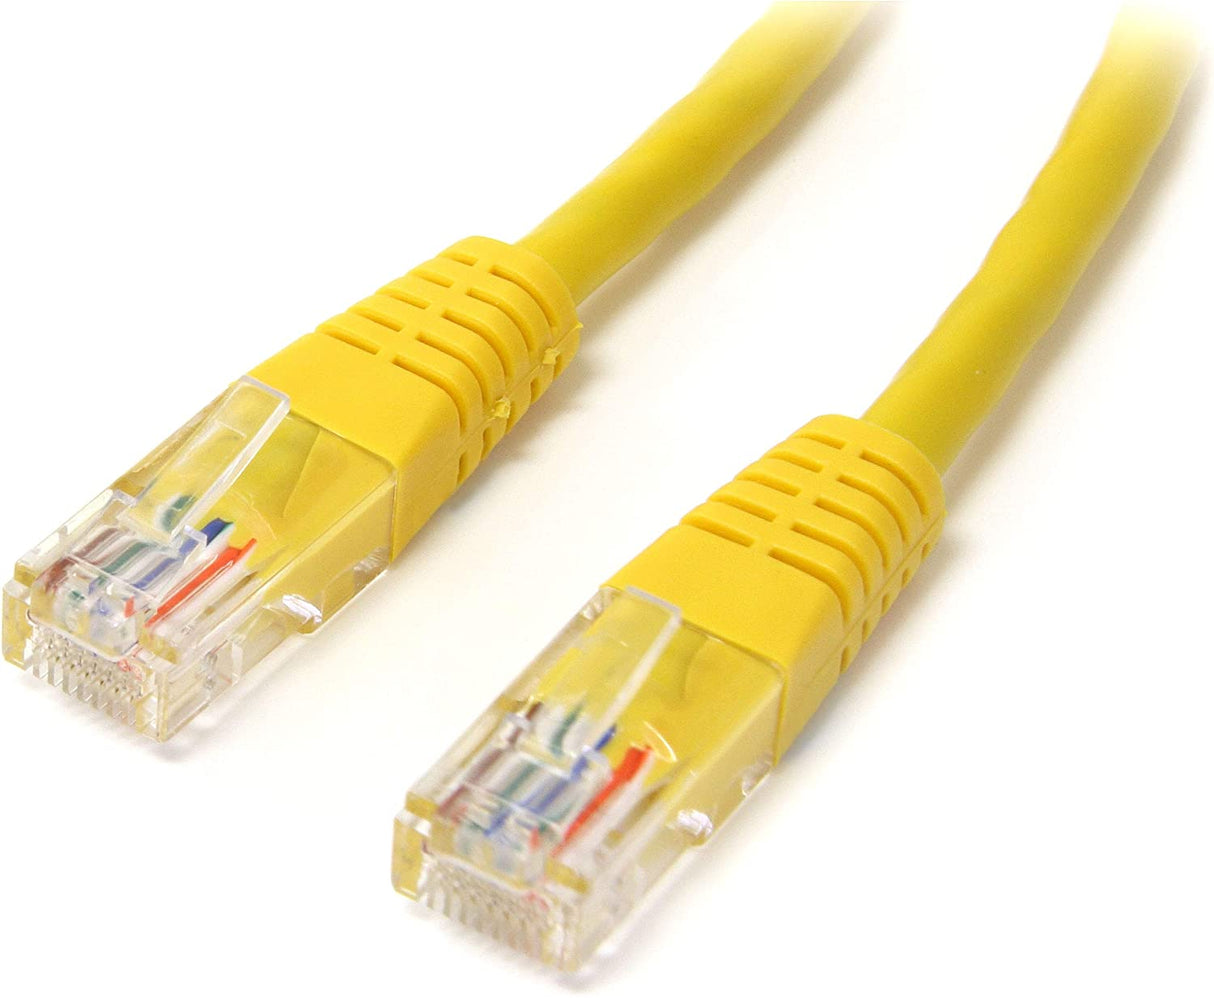 StarTech.com Cat5e Ethernet Cable - 6 ft - Yellow - Patch Cable - Molded Cat5e Cable - Short Network Cable - Ethernet Cord - Cat 5e Cable - 6ft (M45PATCH6YL) 6 ft / 2m Yellow